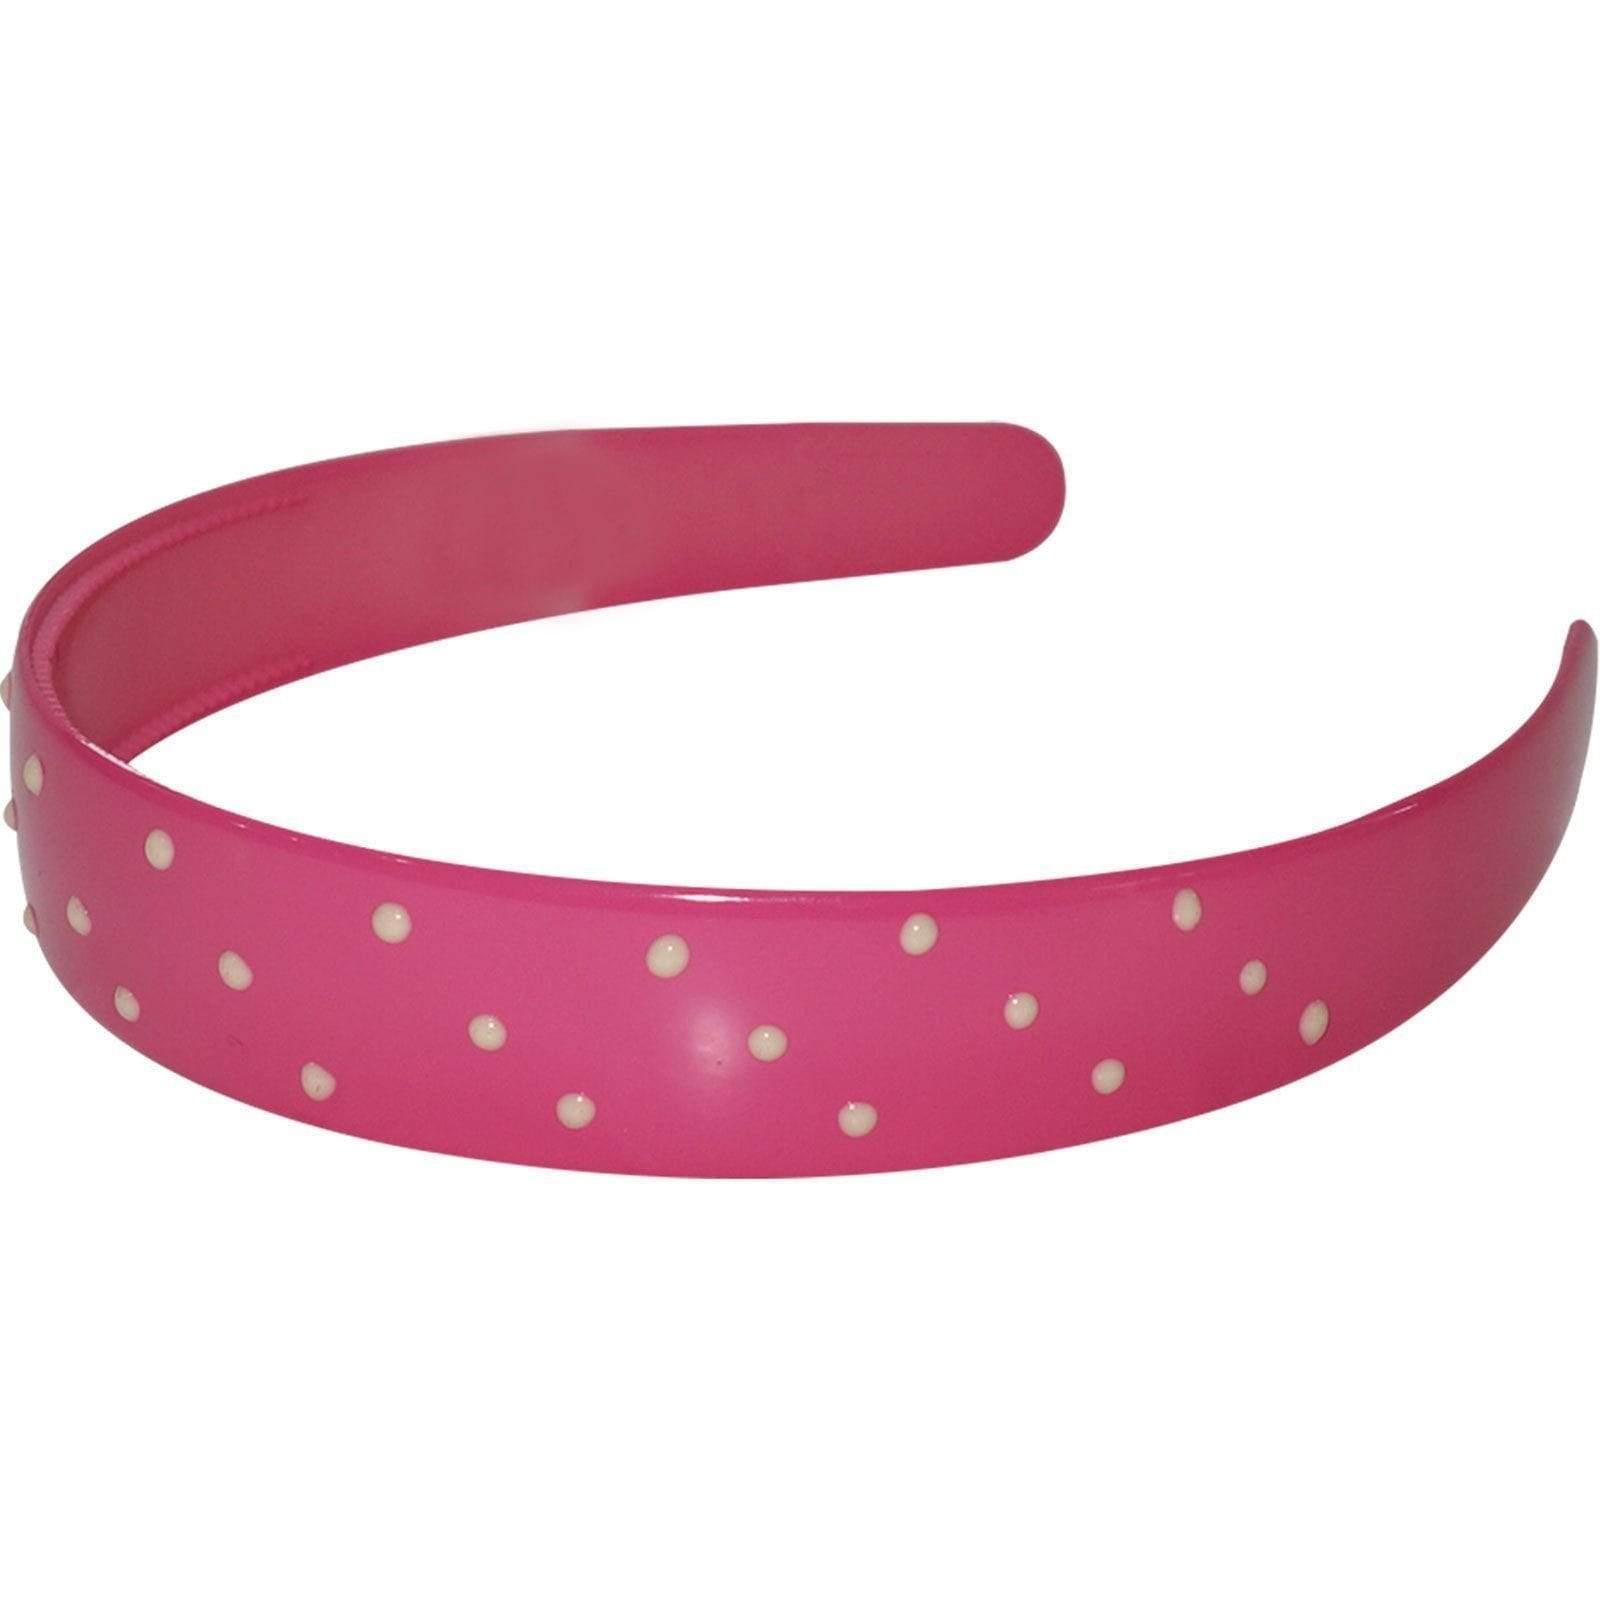 2 X Pink White Dots Hairbands Headbands Alice Hair Bands Accessories Girls Kids